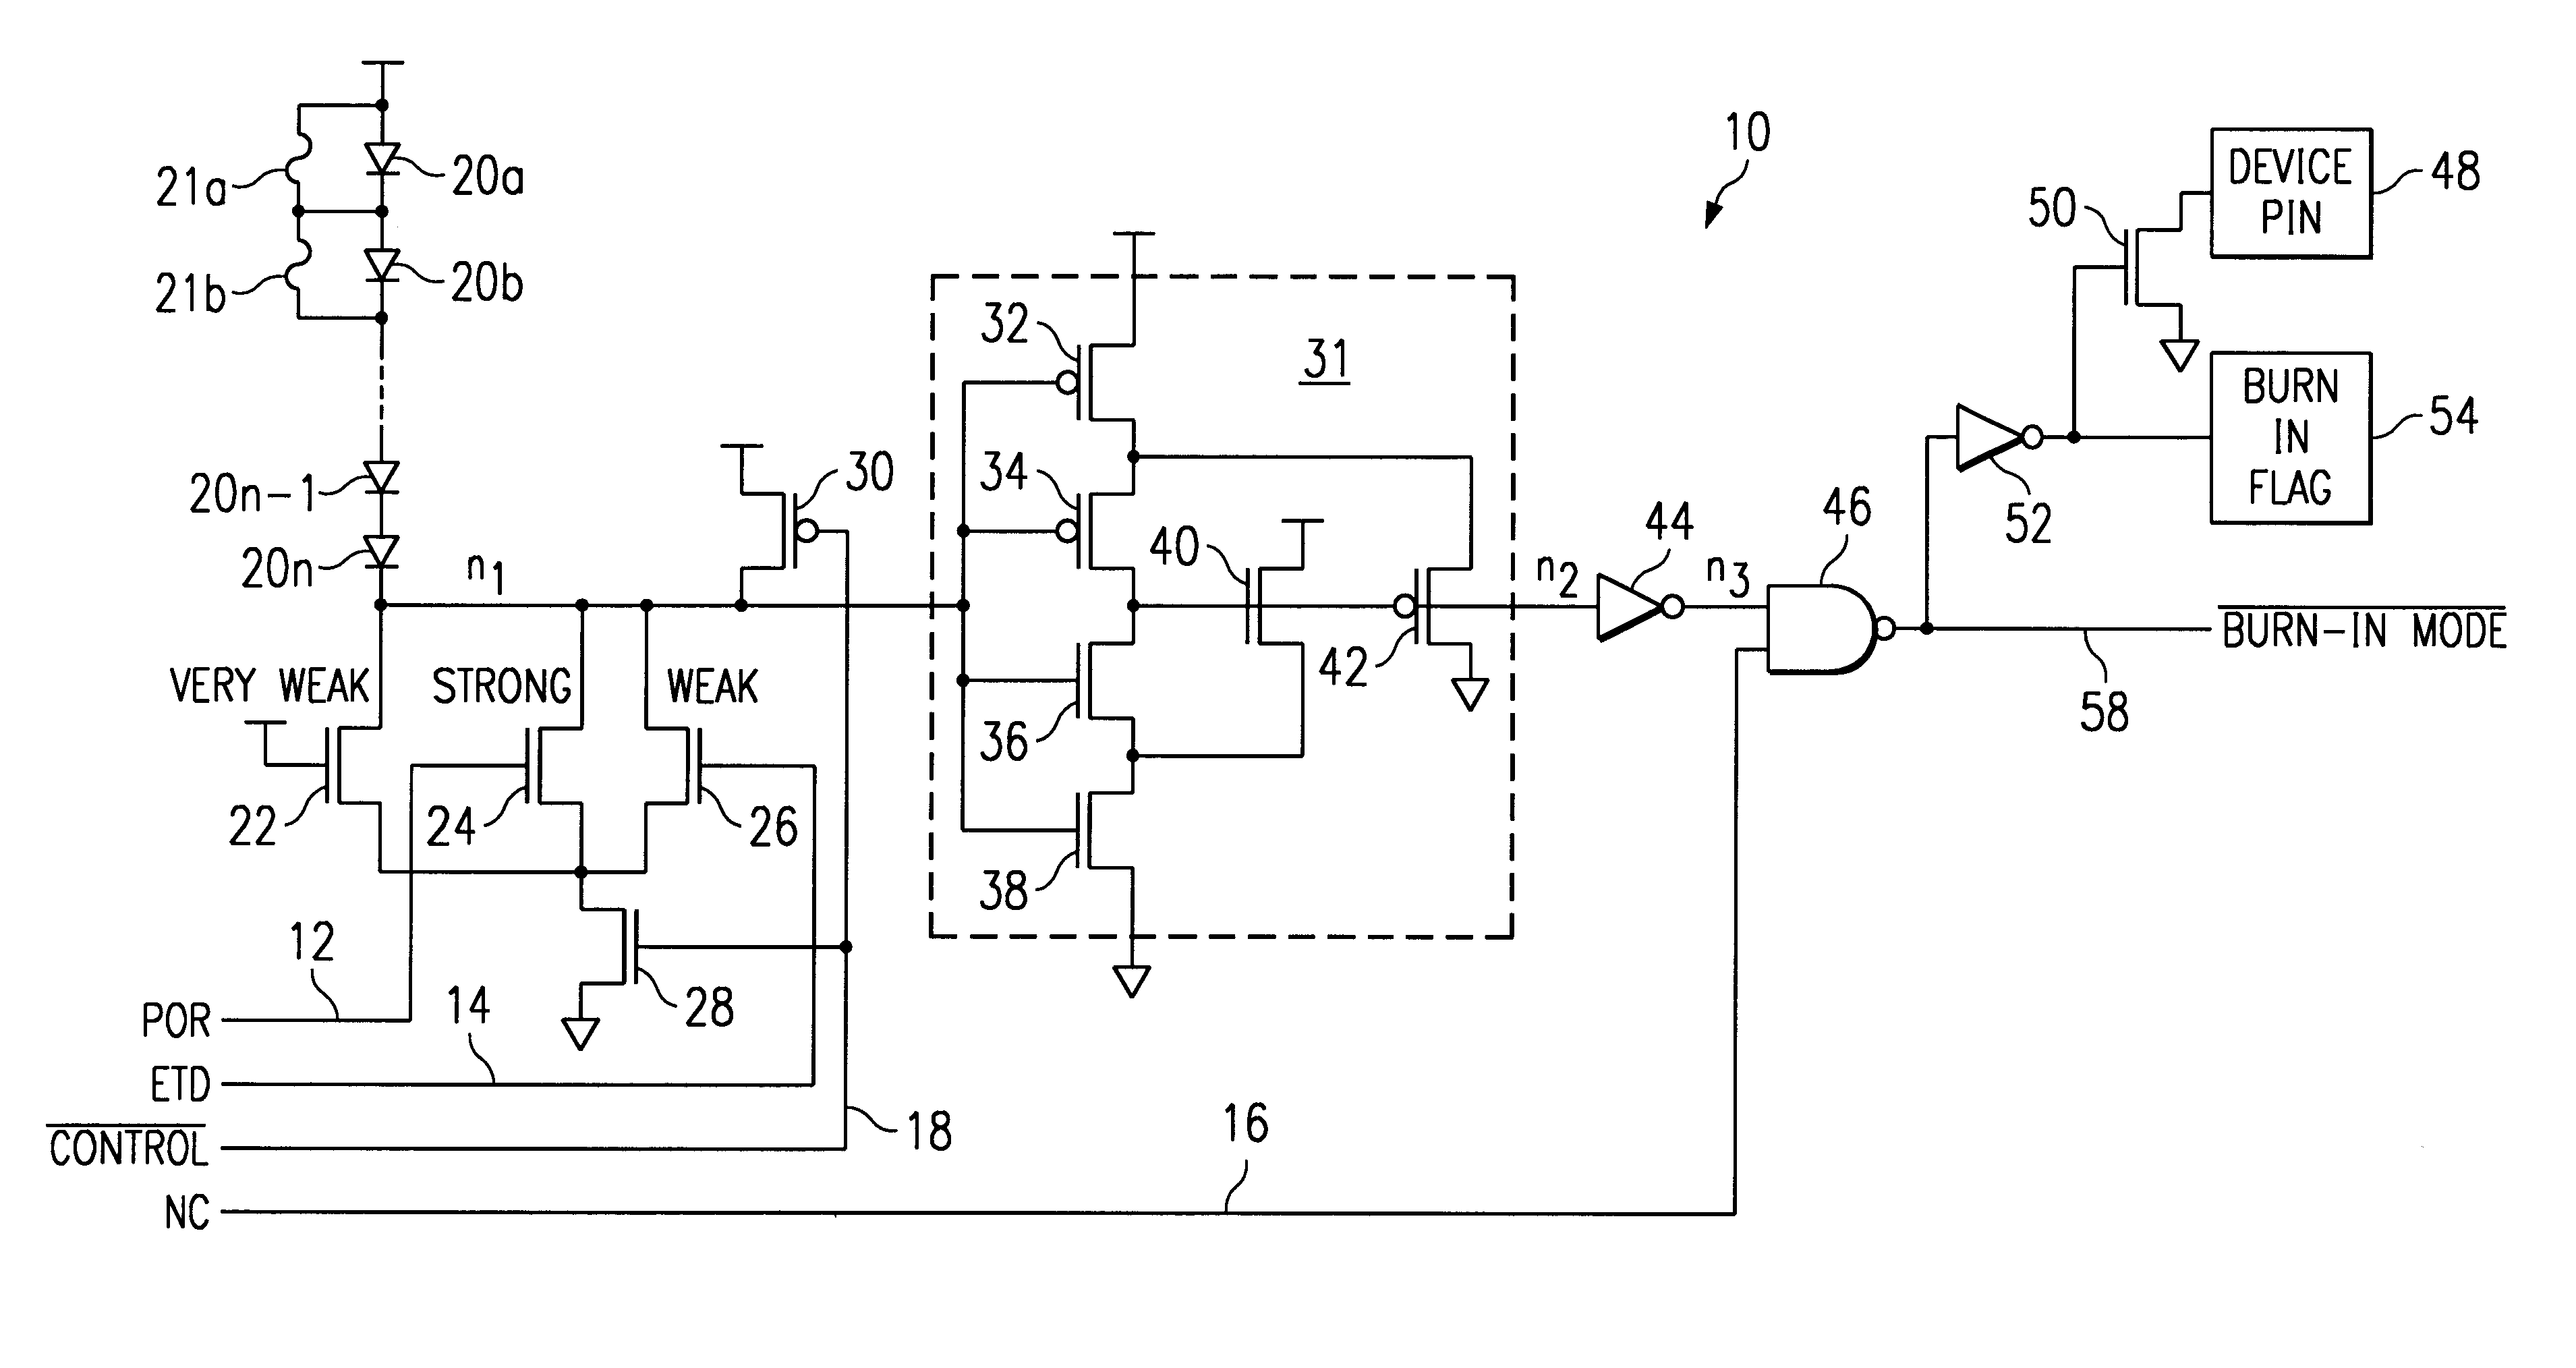 Integrated circuit device having a burn-in mode for which entry into and exit from can be controlled